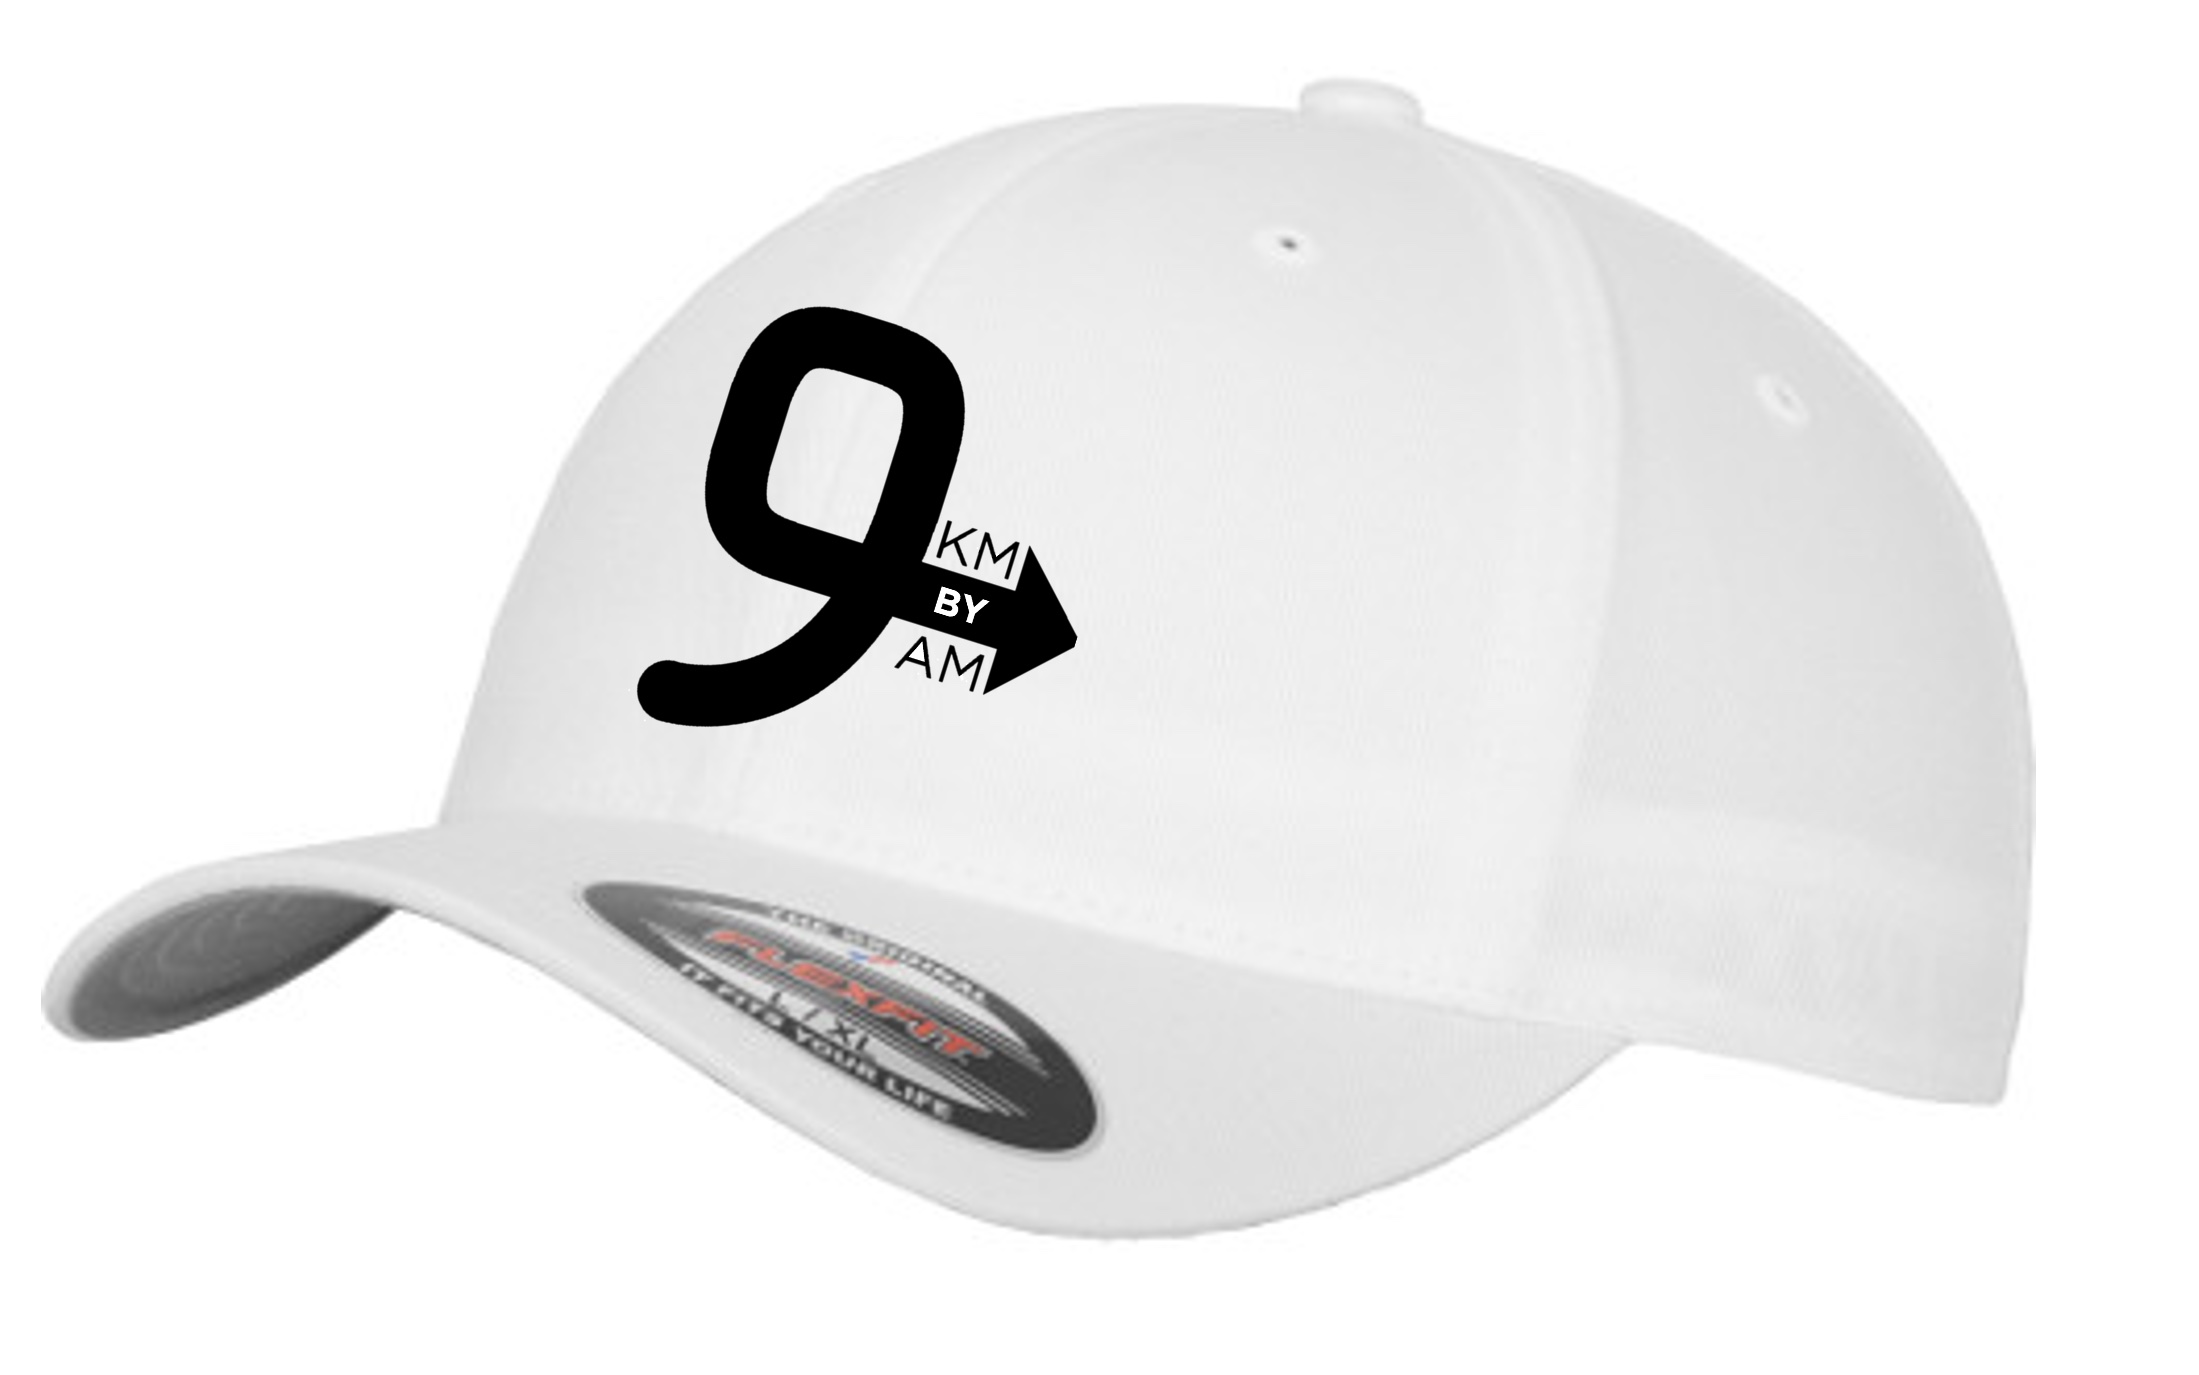 Flexifit Fitted White Baseball Cap with 9KM BY 9AM black logo